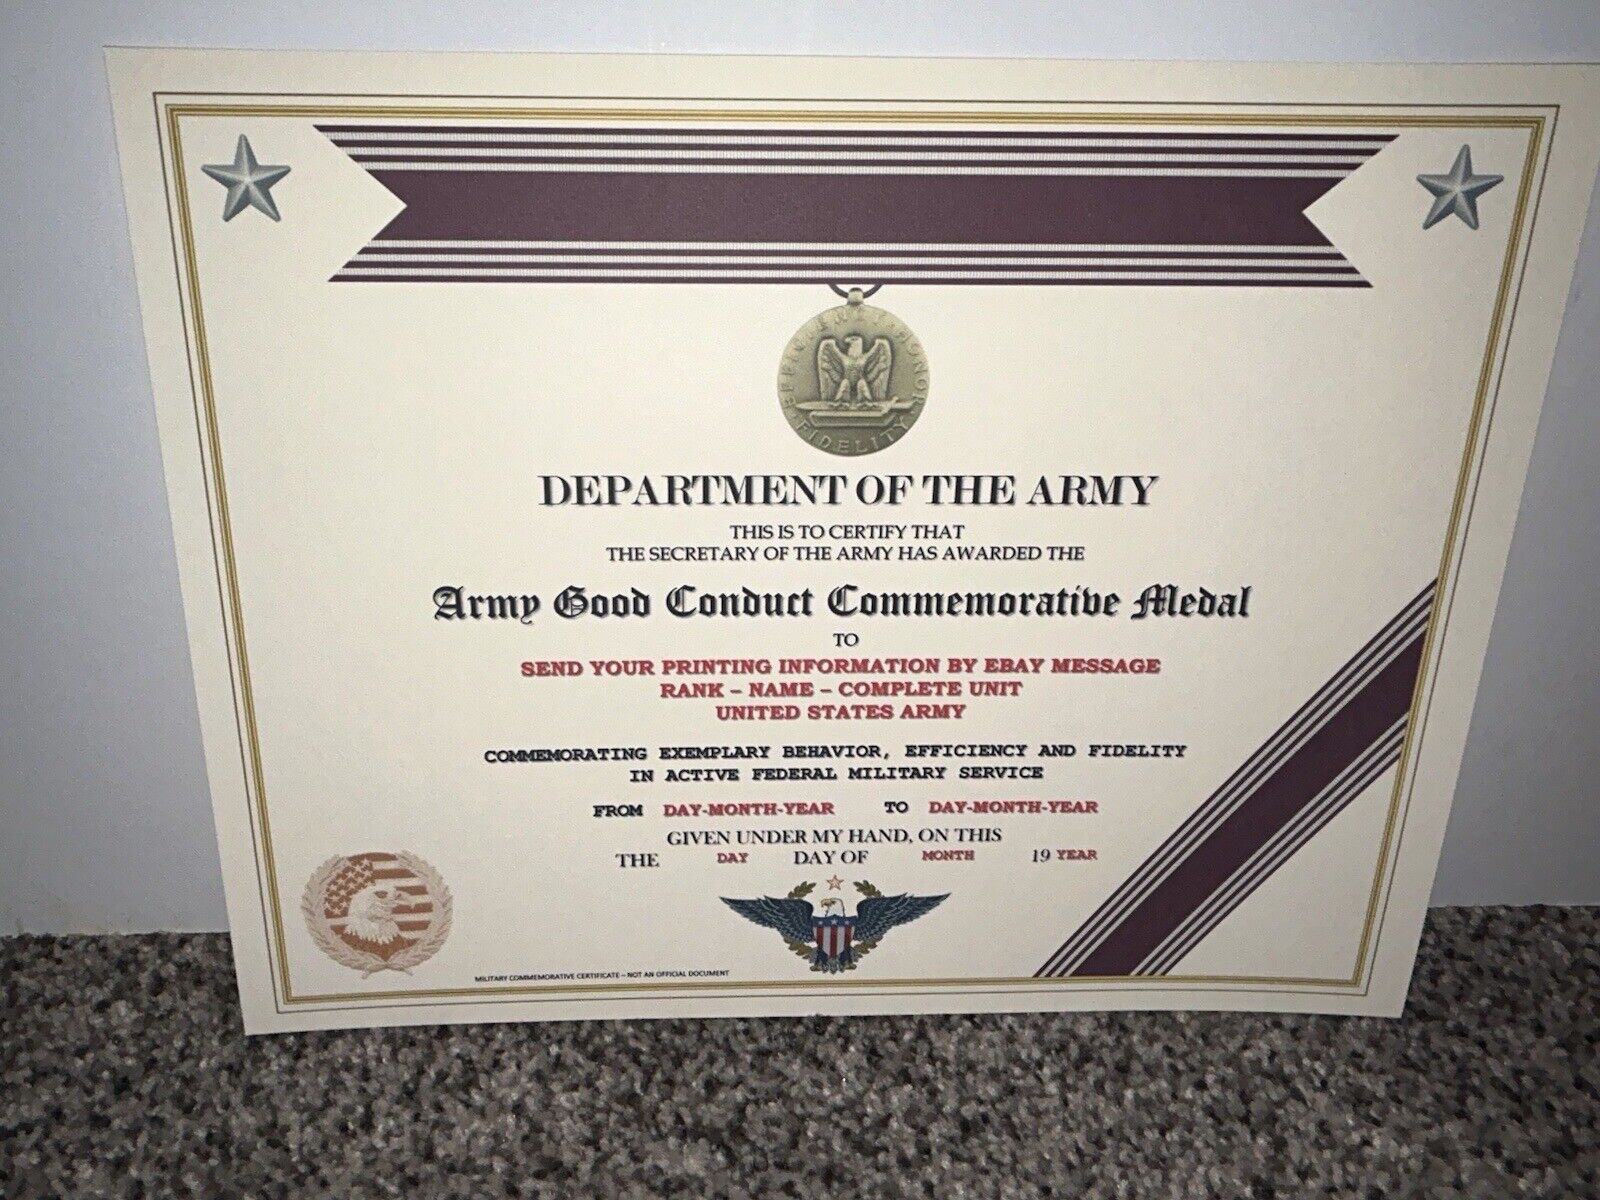 U.S. ARMY GOOD CONDUCT COMMEMORATIVE MEDAL CERTIFICATE~W/PRINTING T-1